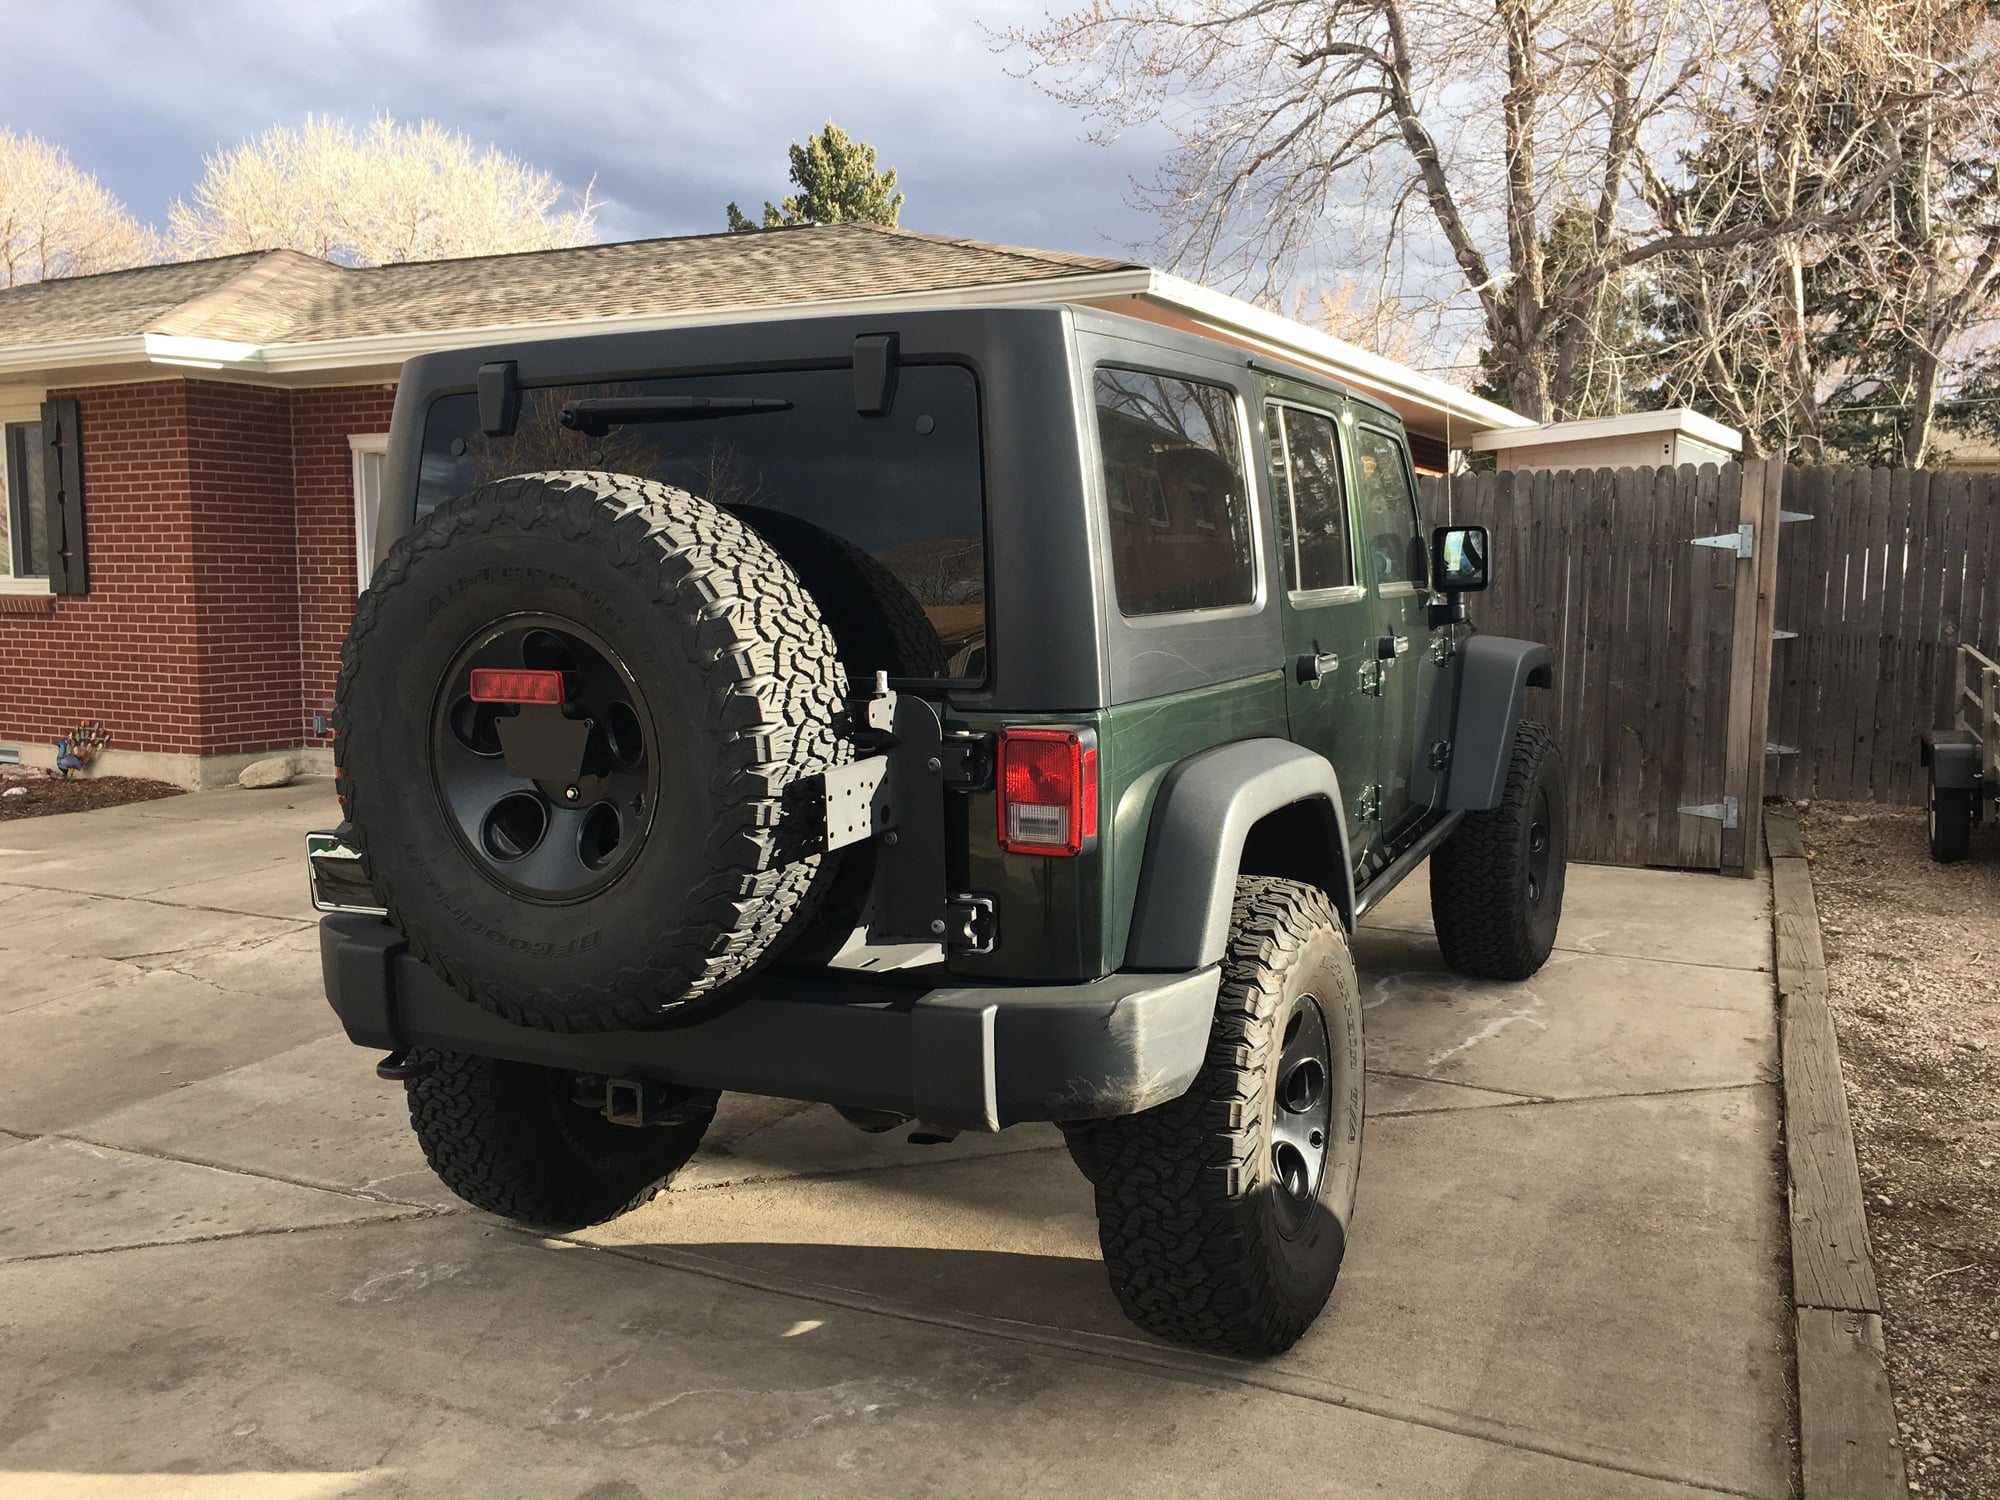 2012 Jeep Wrangler - 2012 Jeep Wrangler Unlimited Rubicon - Used - VIN 00000000000000000 - 37,400 Miles - 6 cyl - 4WD - Automatic - Truck - Other - Lakewood, CO 80228, United States